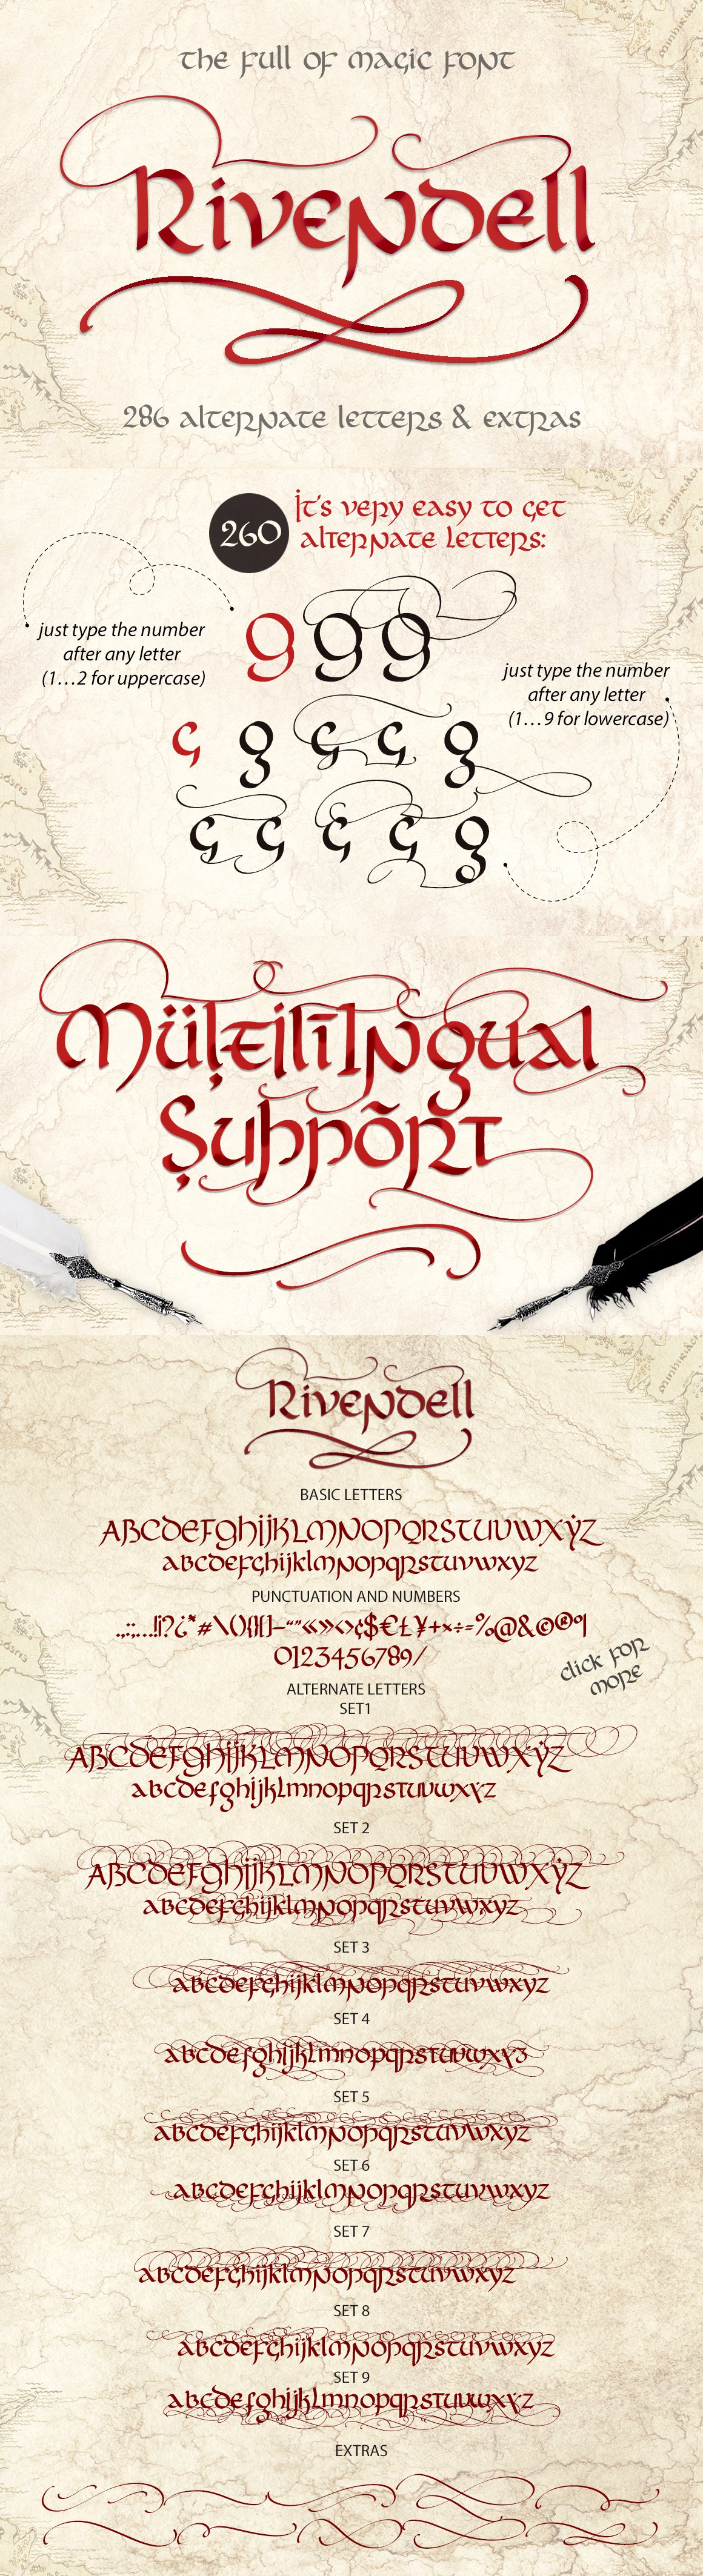 Rivendell. The full of magic font. cover image.